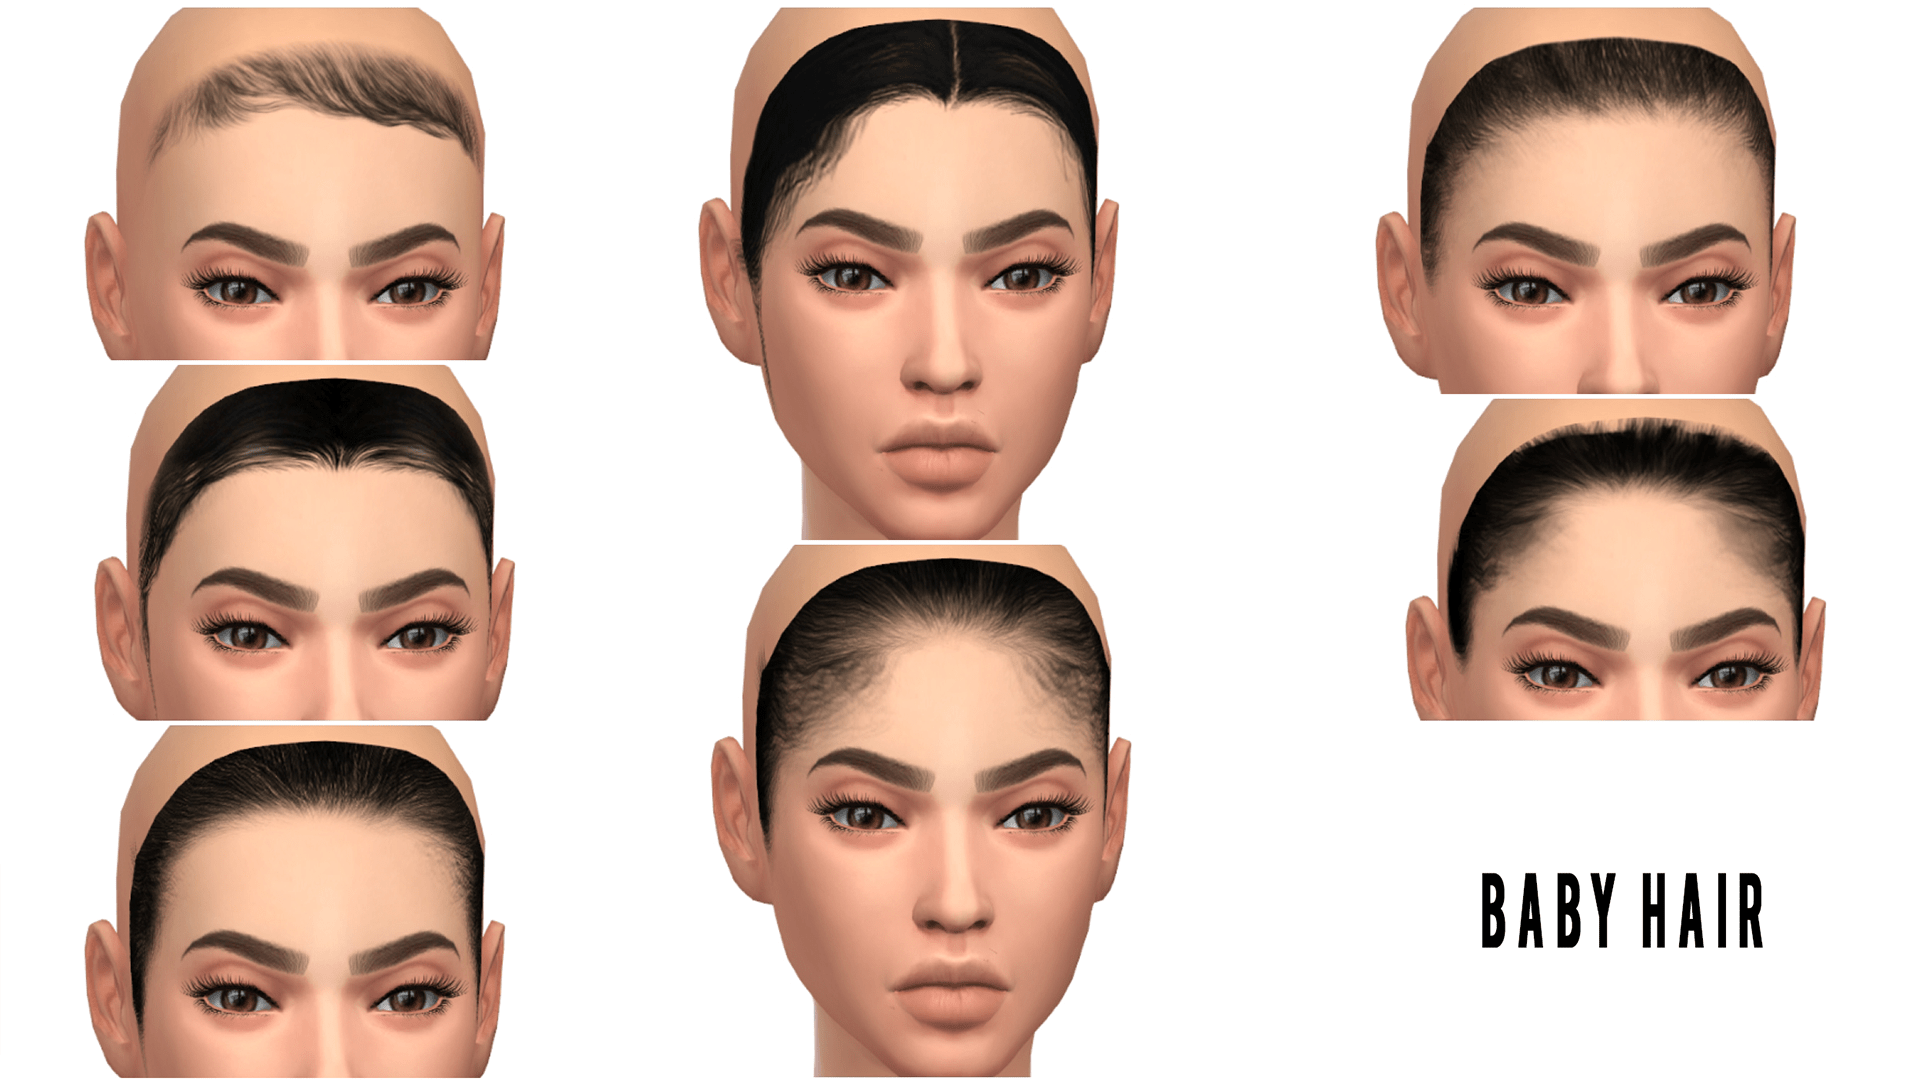 the sims 4 skin replacement mod